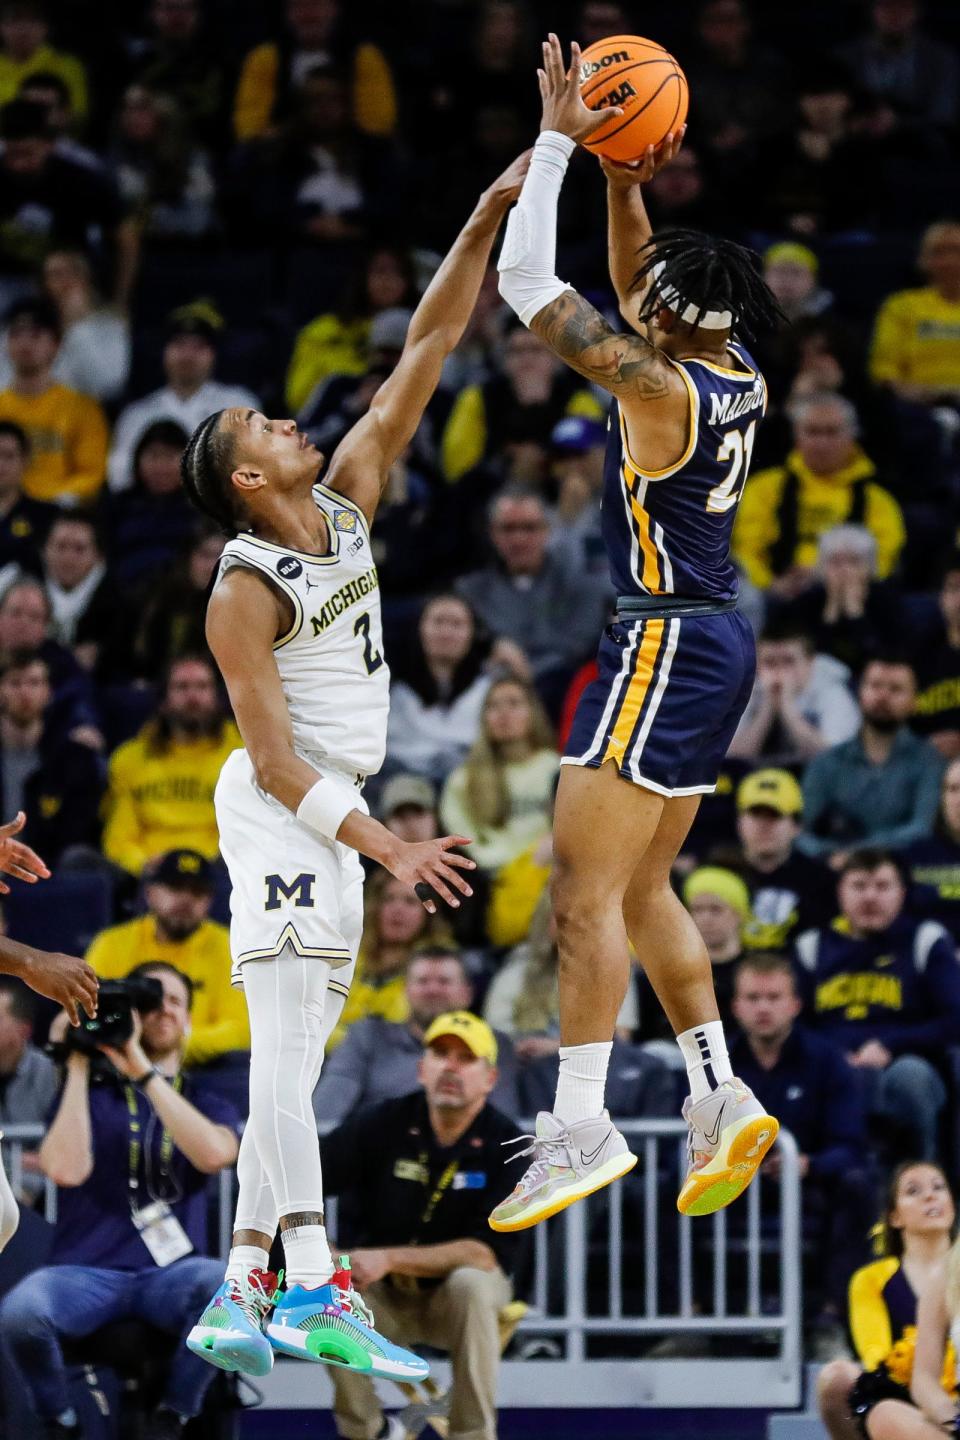 Michigan guard Kobe Bufkin (2) tries to block a shot from Toledo guard Dante Maddox Jr. (21) during the first half of the first round of the NIT at Crisler Center in Ann Arbor on Tuesday, March 14, 2023.